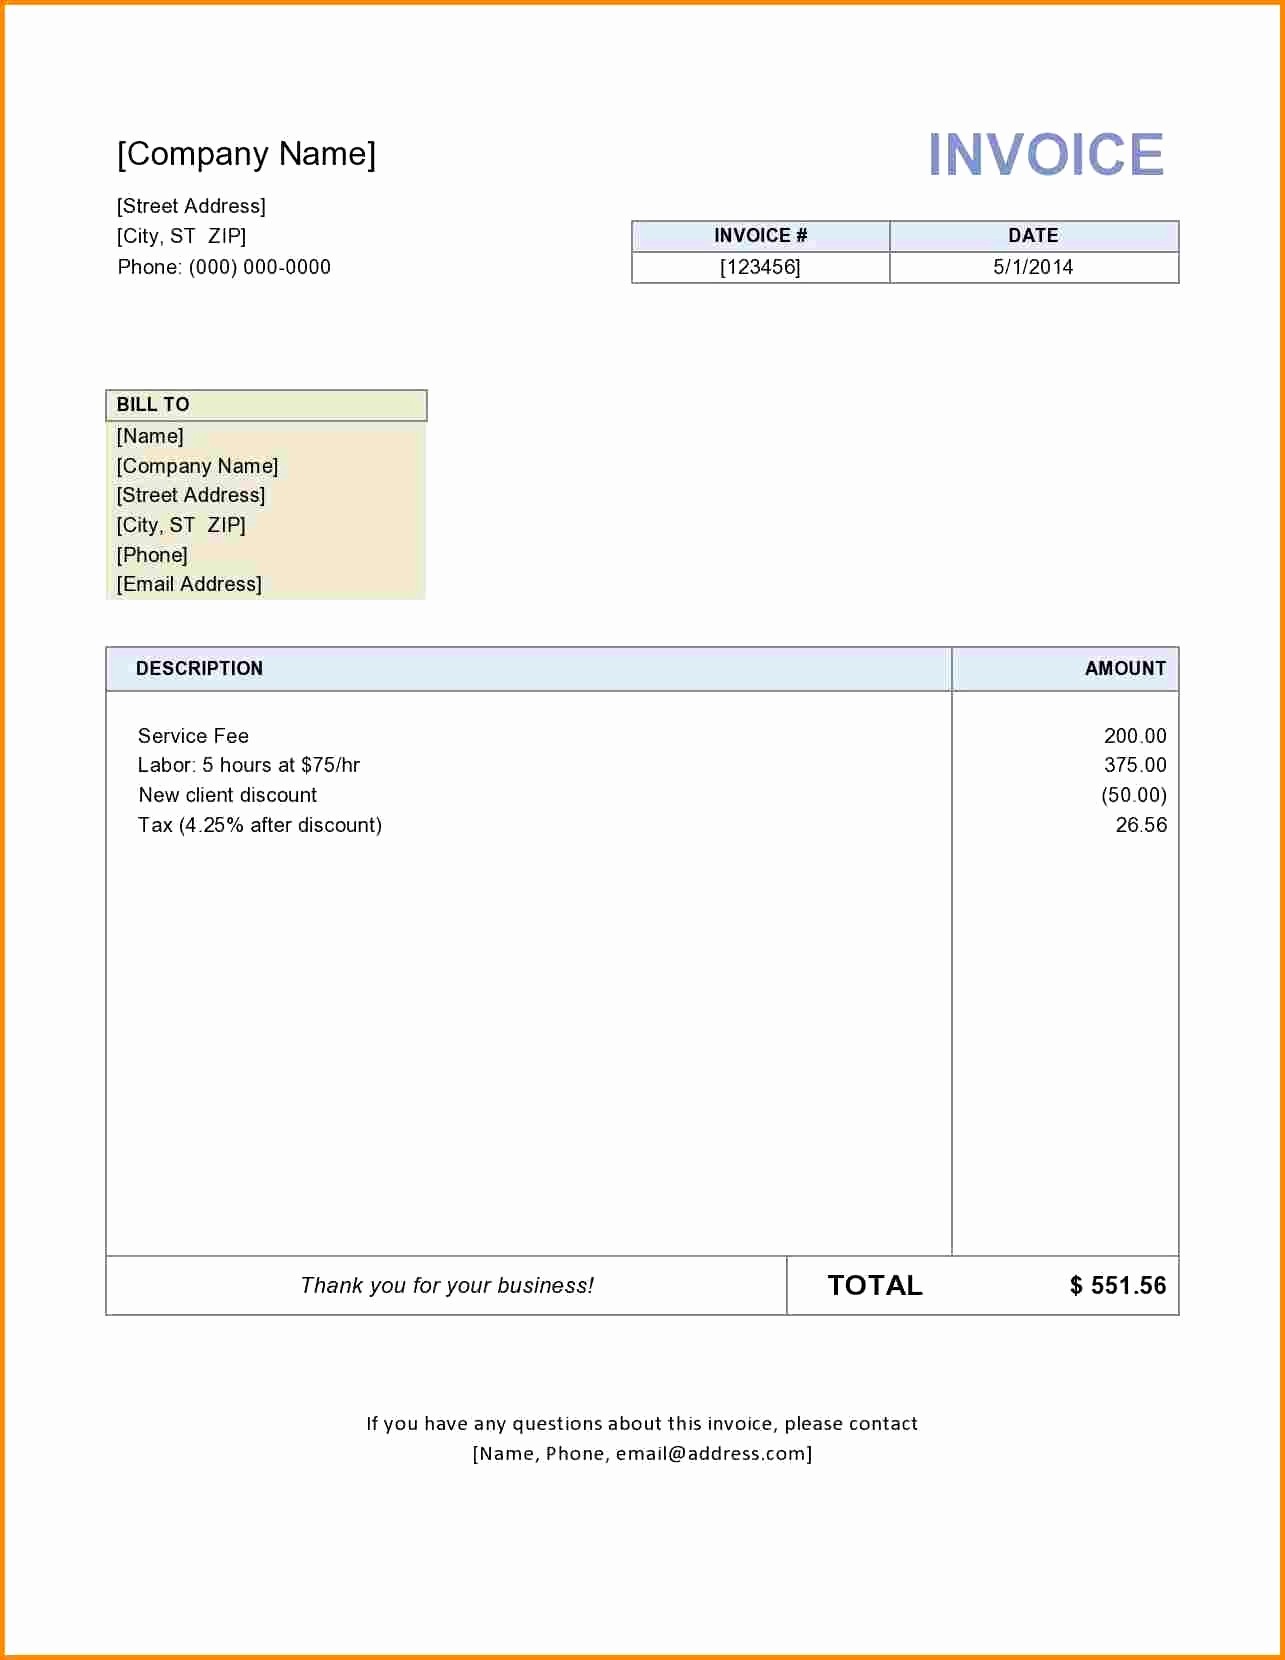 Writing Invoices Self Employed Beautiful 20 Beneficial Business Document